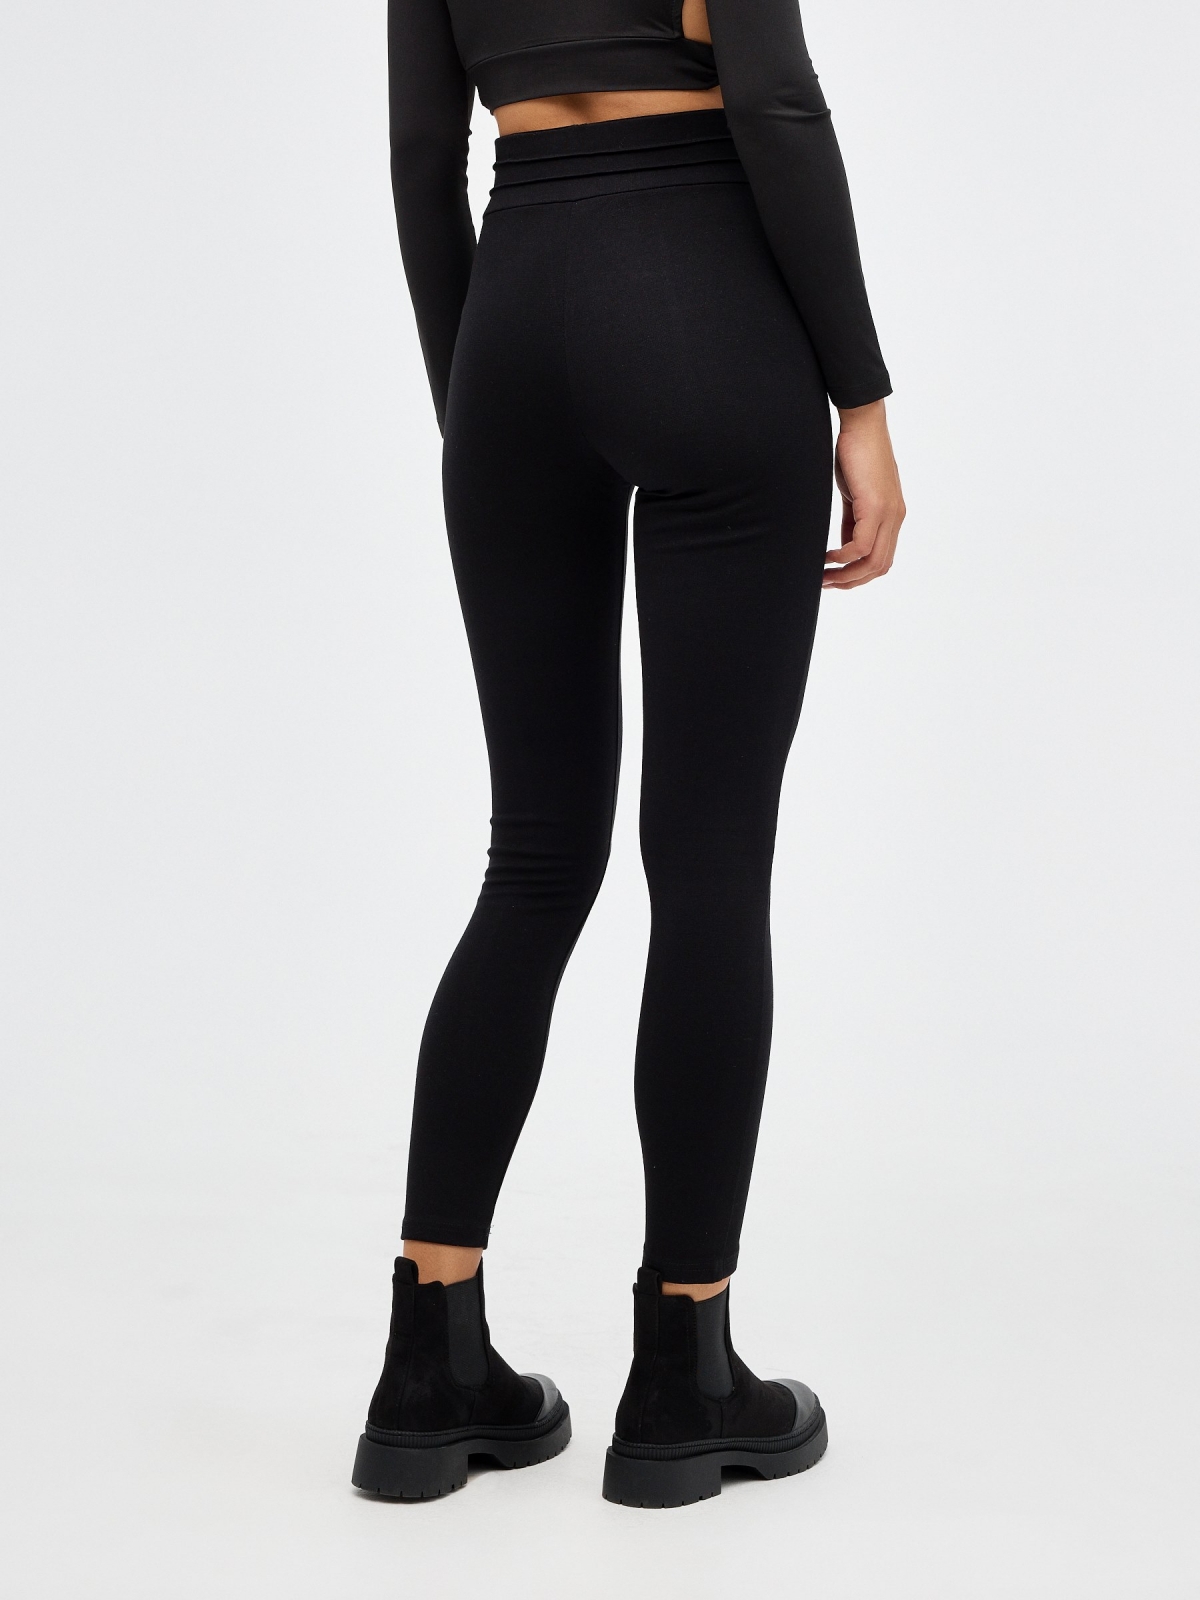 Superskinny leggings with buttons, Women's Trousers